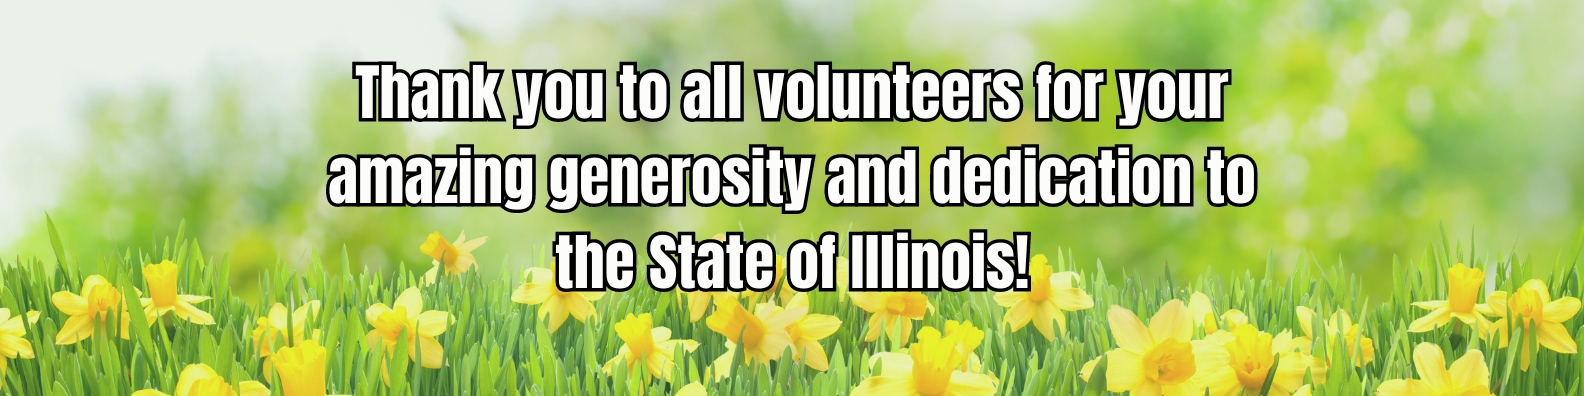 "Thank you to all volunteers for your amazing generosity and dedication to the State of illinois" with flowers